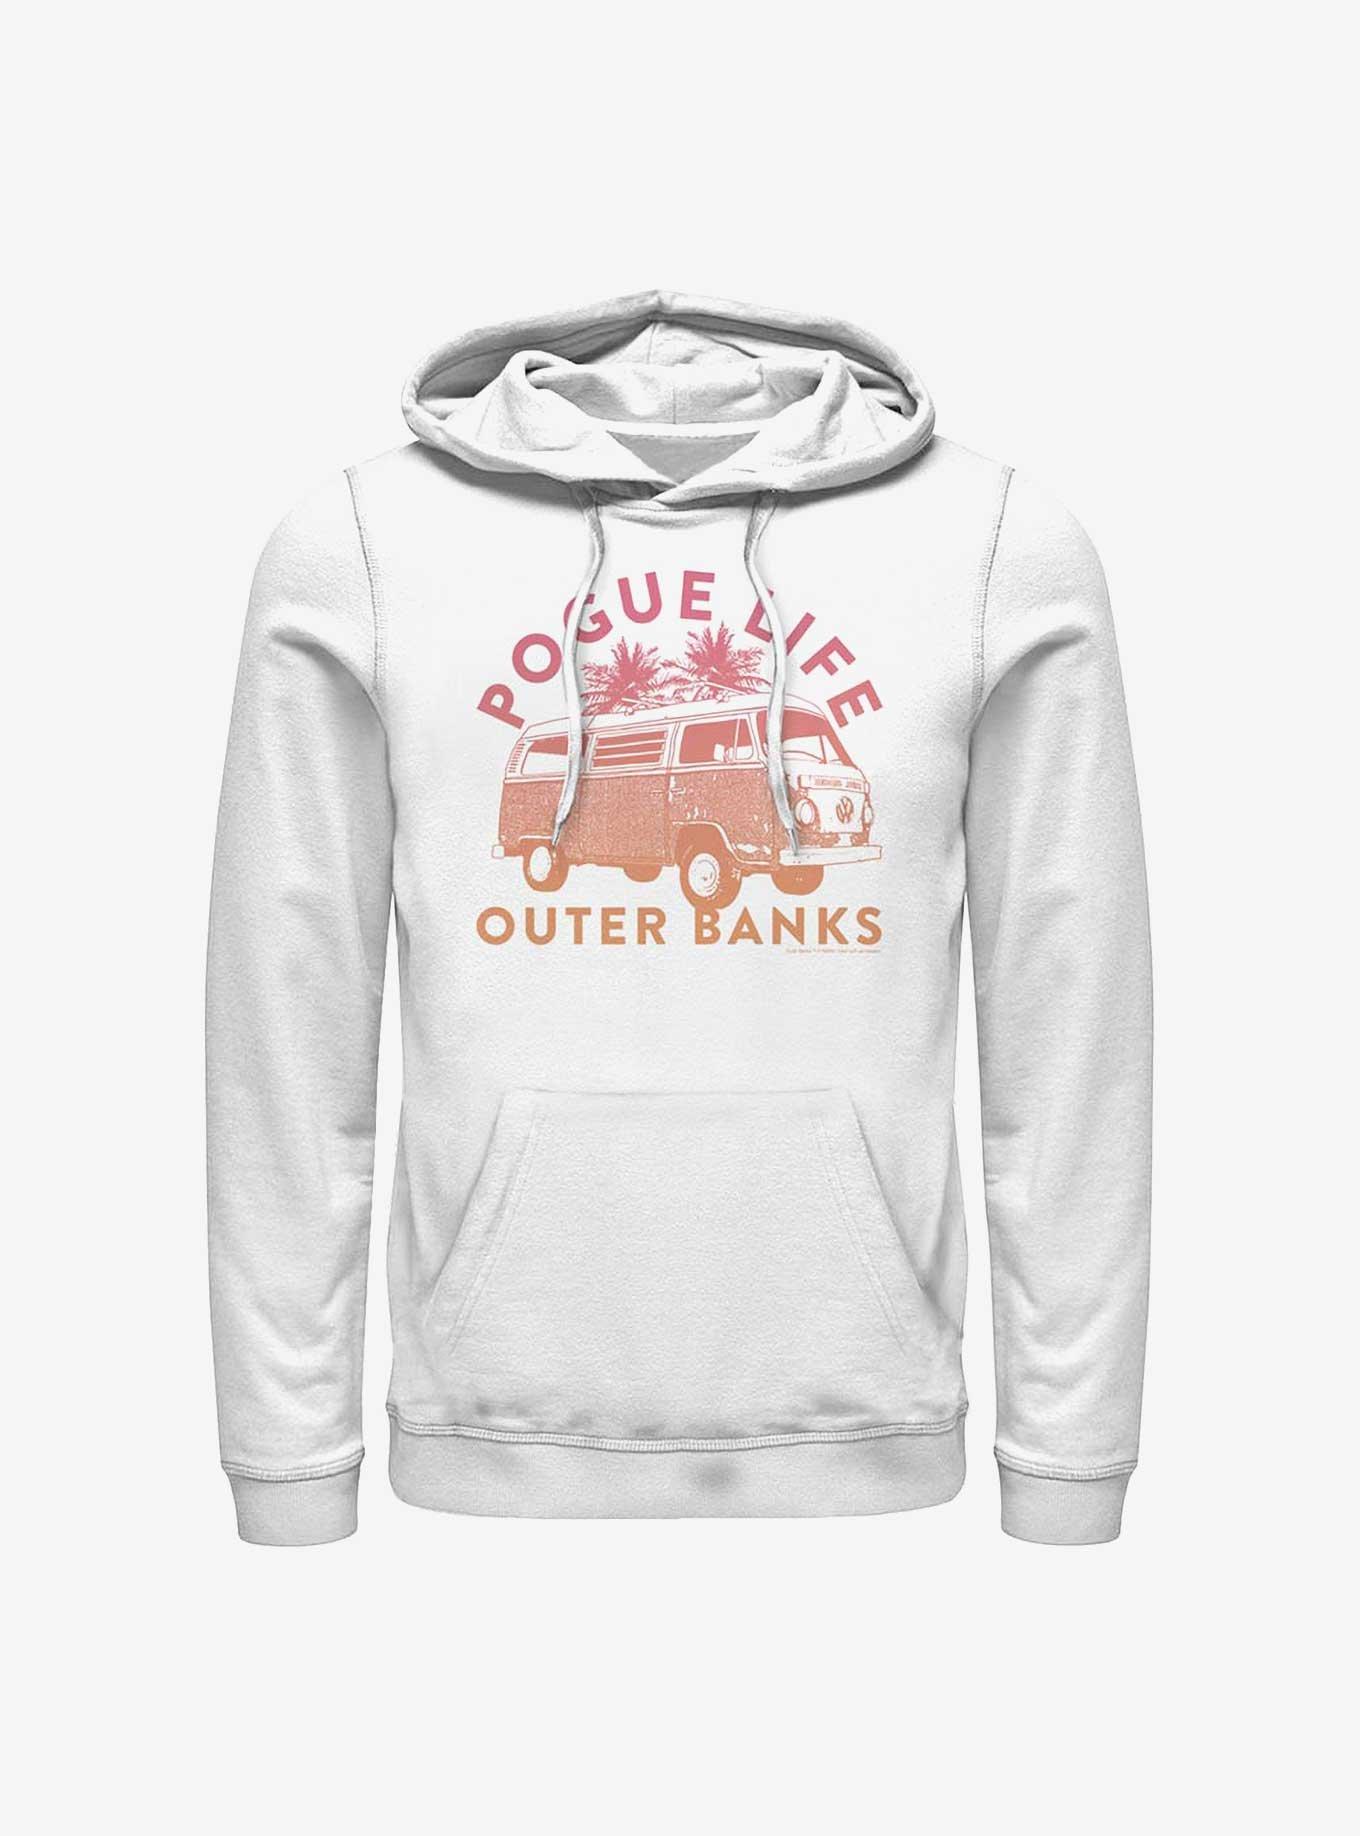 Outer Banks Pogue Life Hoodie, WHITE, hi-res